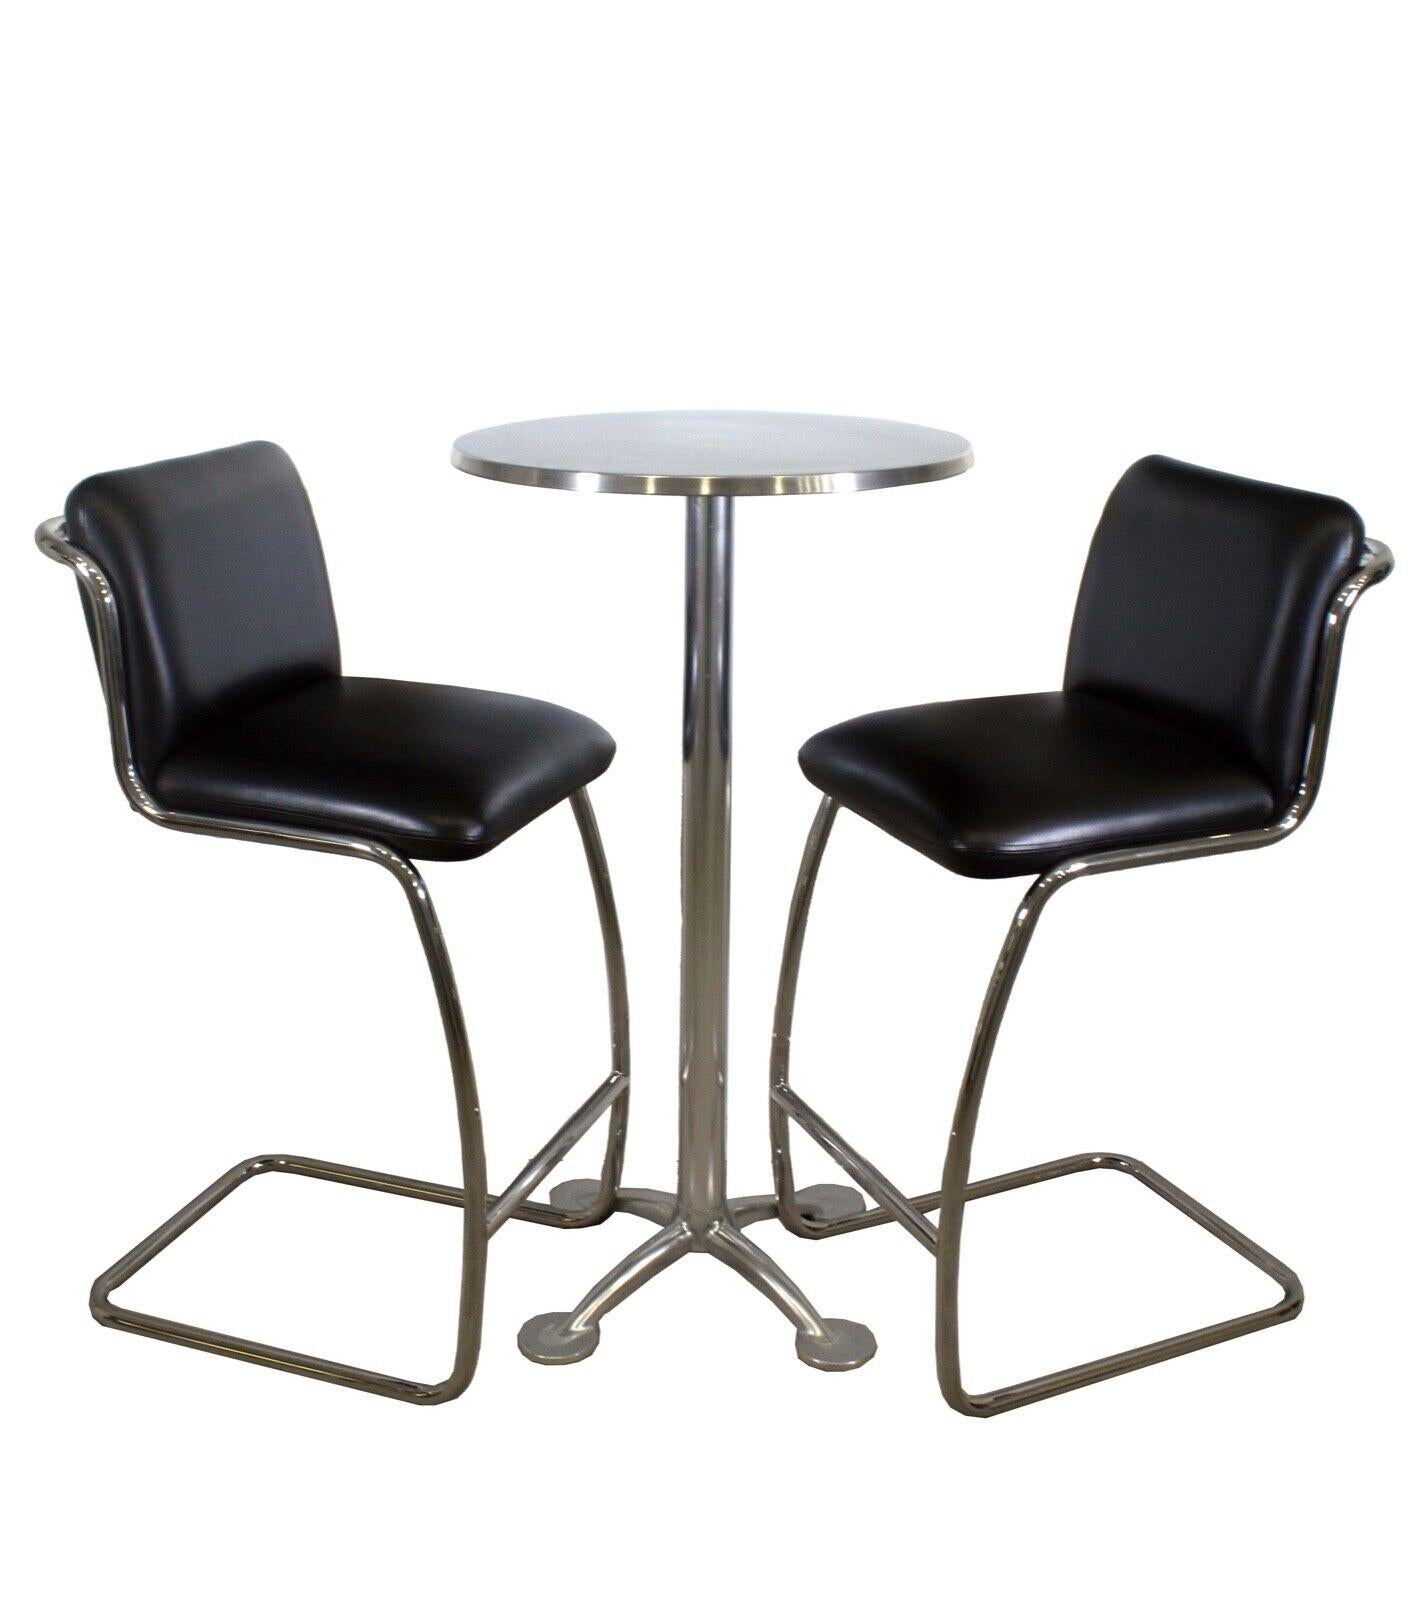 This set of 6 brueton tubular chrome cantilever hightop bar stools and aluminum chrome pub tables are perfect for any modern kitchen or bar. The sleek chrome finish on the stools and table give the set a contemporary and stylish look. The stools